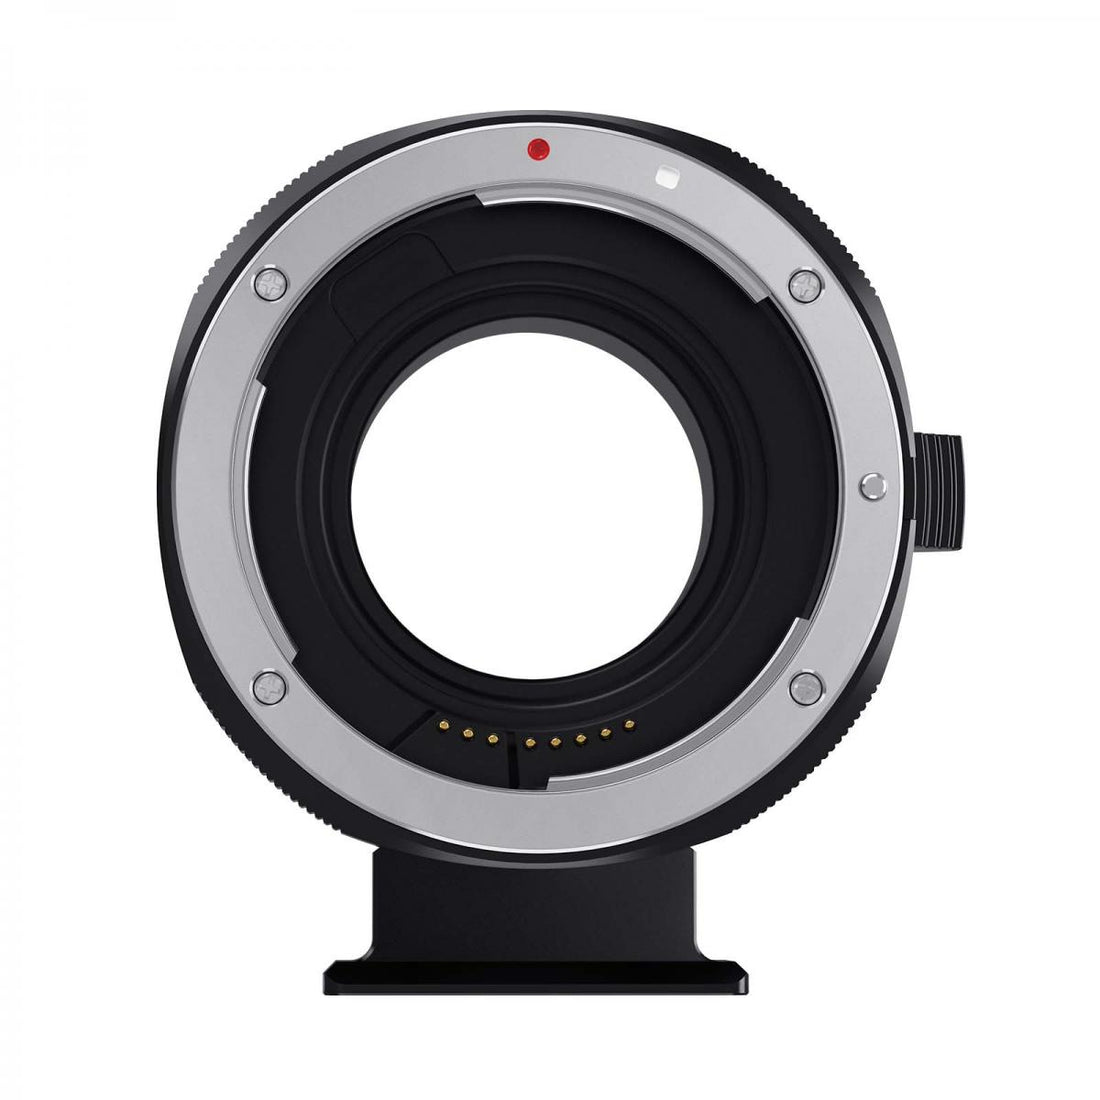 K&amp;F PRO Auto Focus Lens Adapter for Canon EF and EF-S Lenses to Canon M Mount - KF06-464